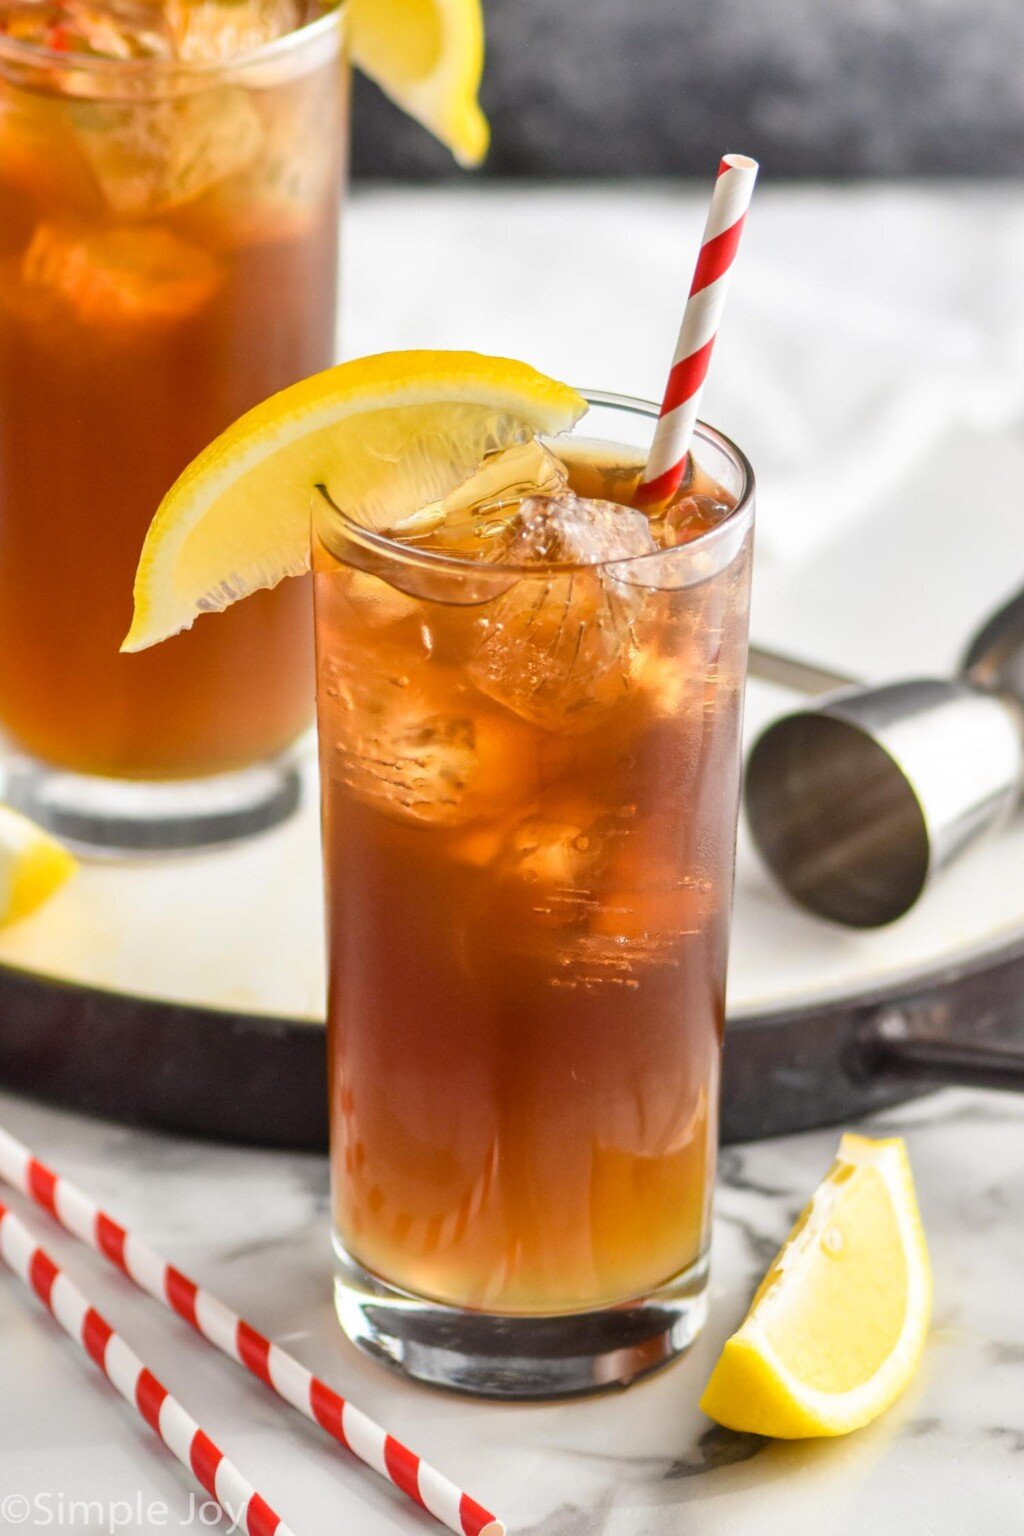 Discover the Perfect Long Island Iced Tea Recipe: Ingredients and Tips